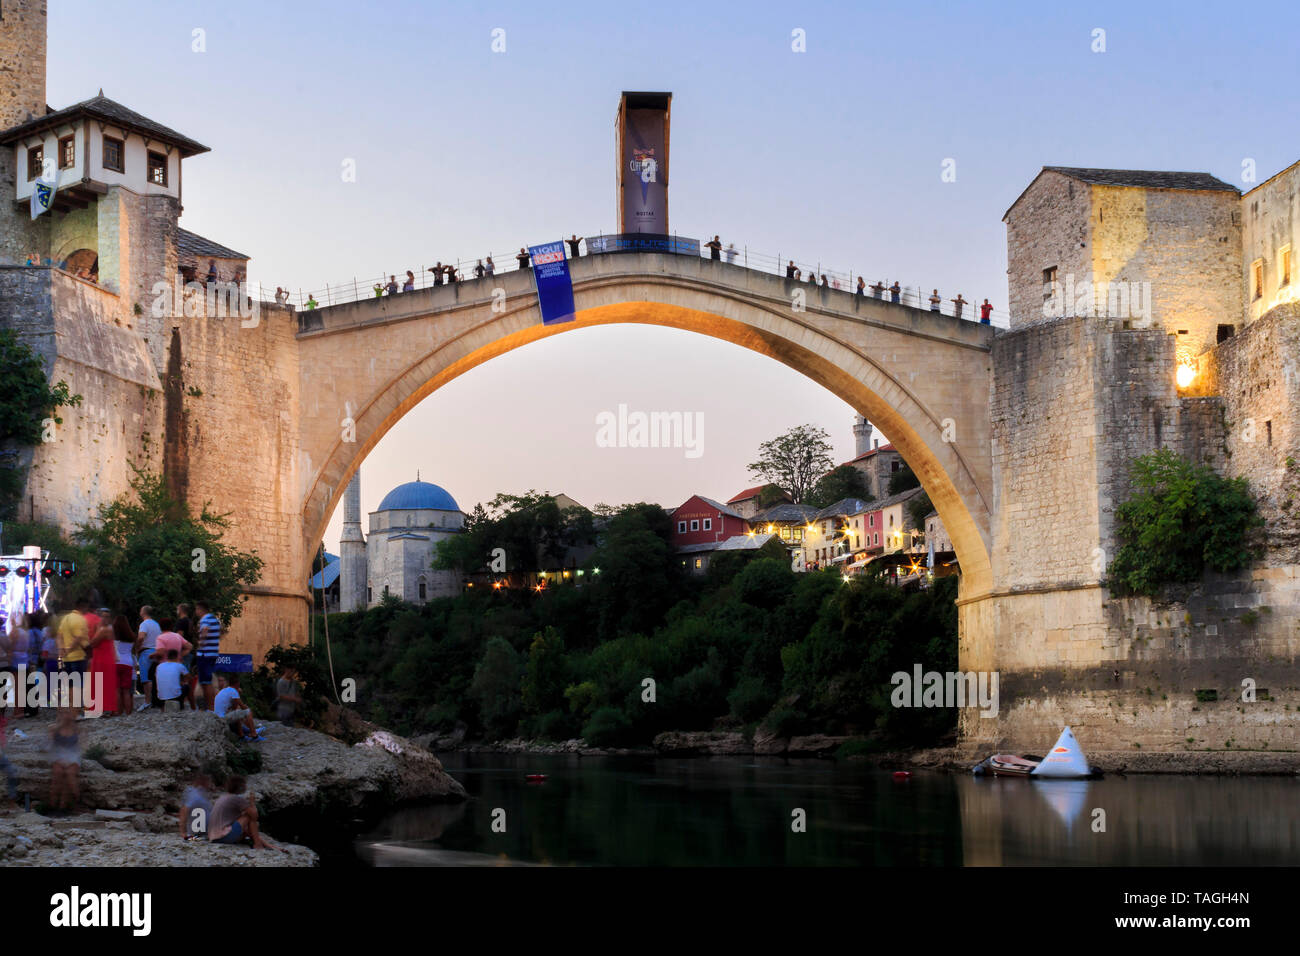 MOSTAR, BOSNIA AND HERZEGOVINA - AUGUST 13, 2015: Dusk photo of Tourist and locals walking near Old bridge in Mostar while there are preparation for R Stock Photo